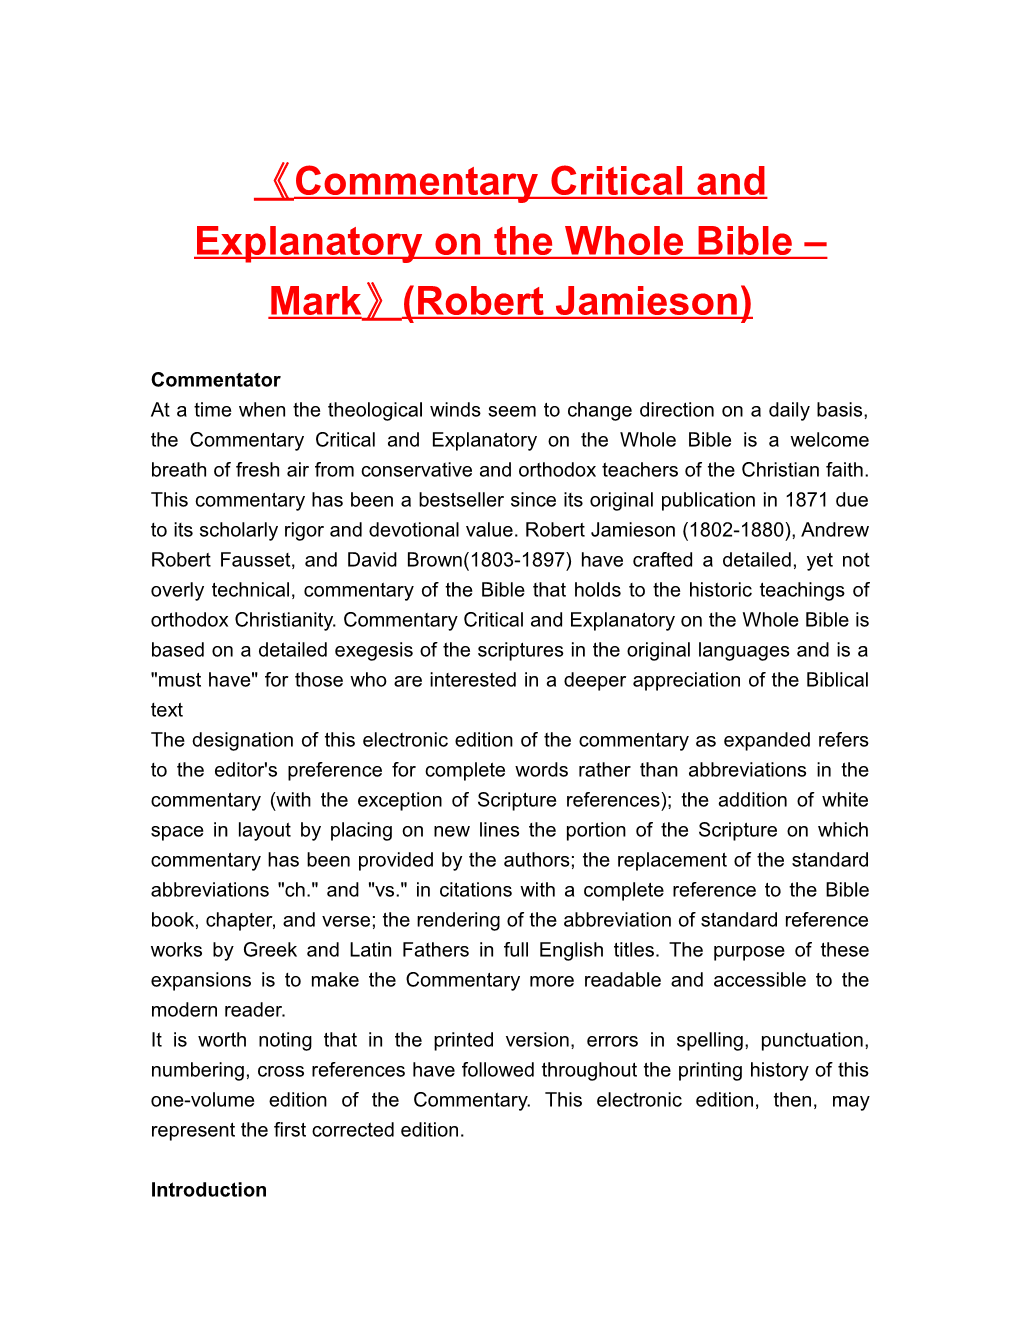 Commentary Critical and Explanatory on the Whole Bible Mark (Robert Jamieson)